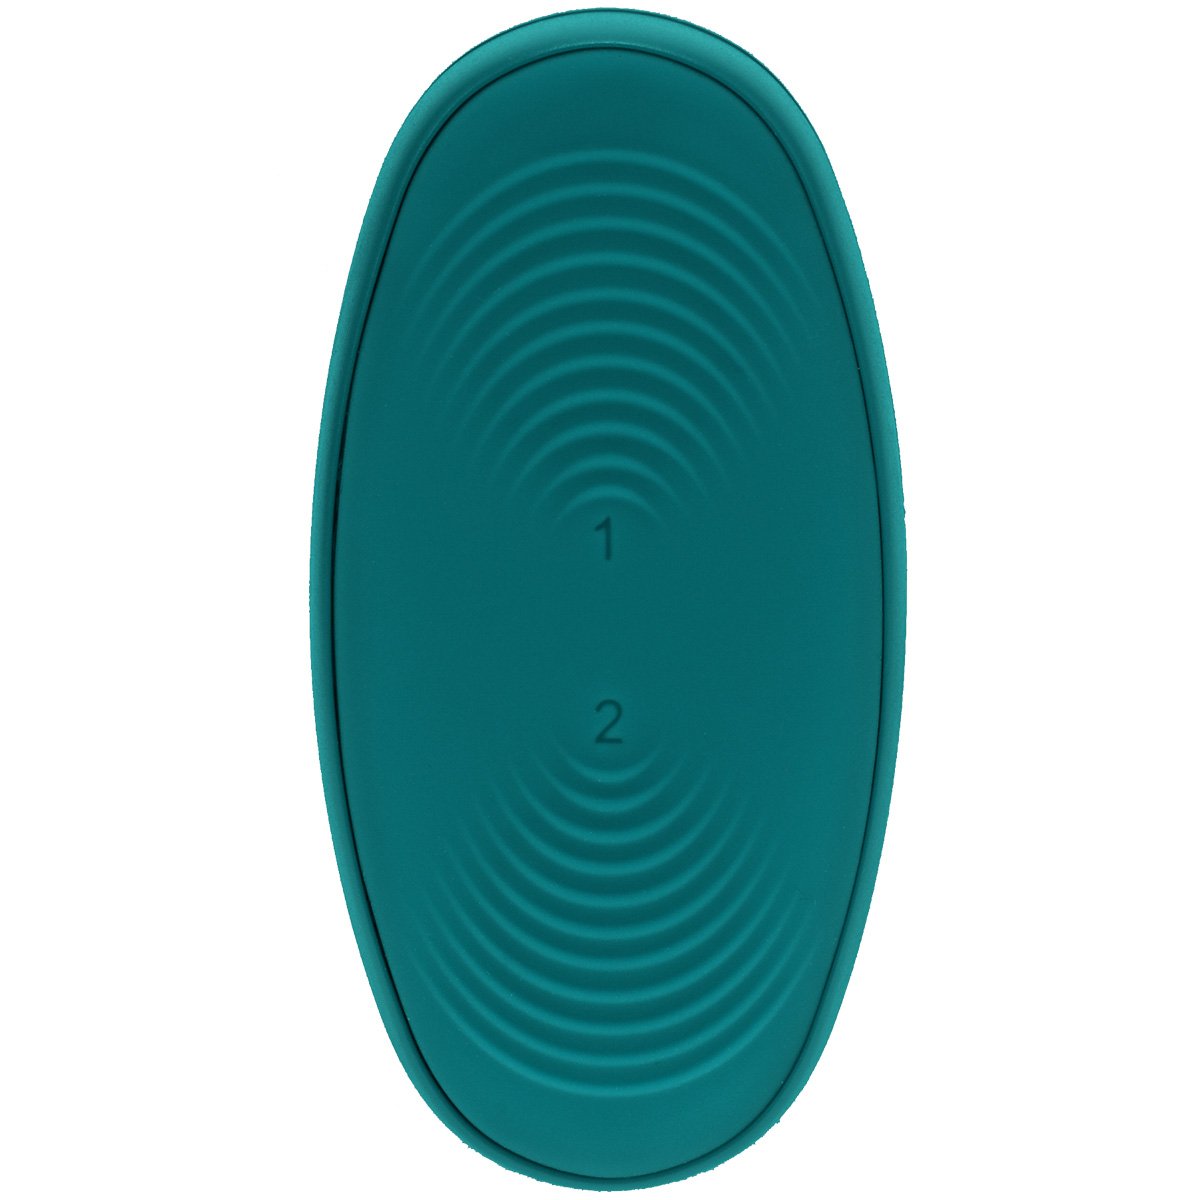 Doc Johnson Tryst V2 Bendable Multi Erogenous Zone Silicone Massager - Teal